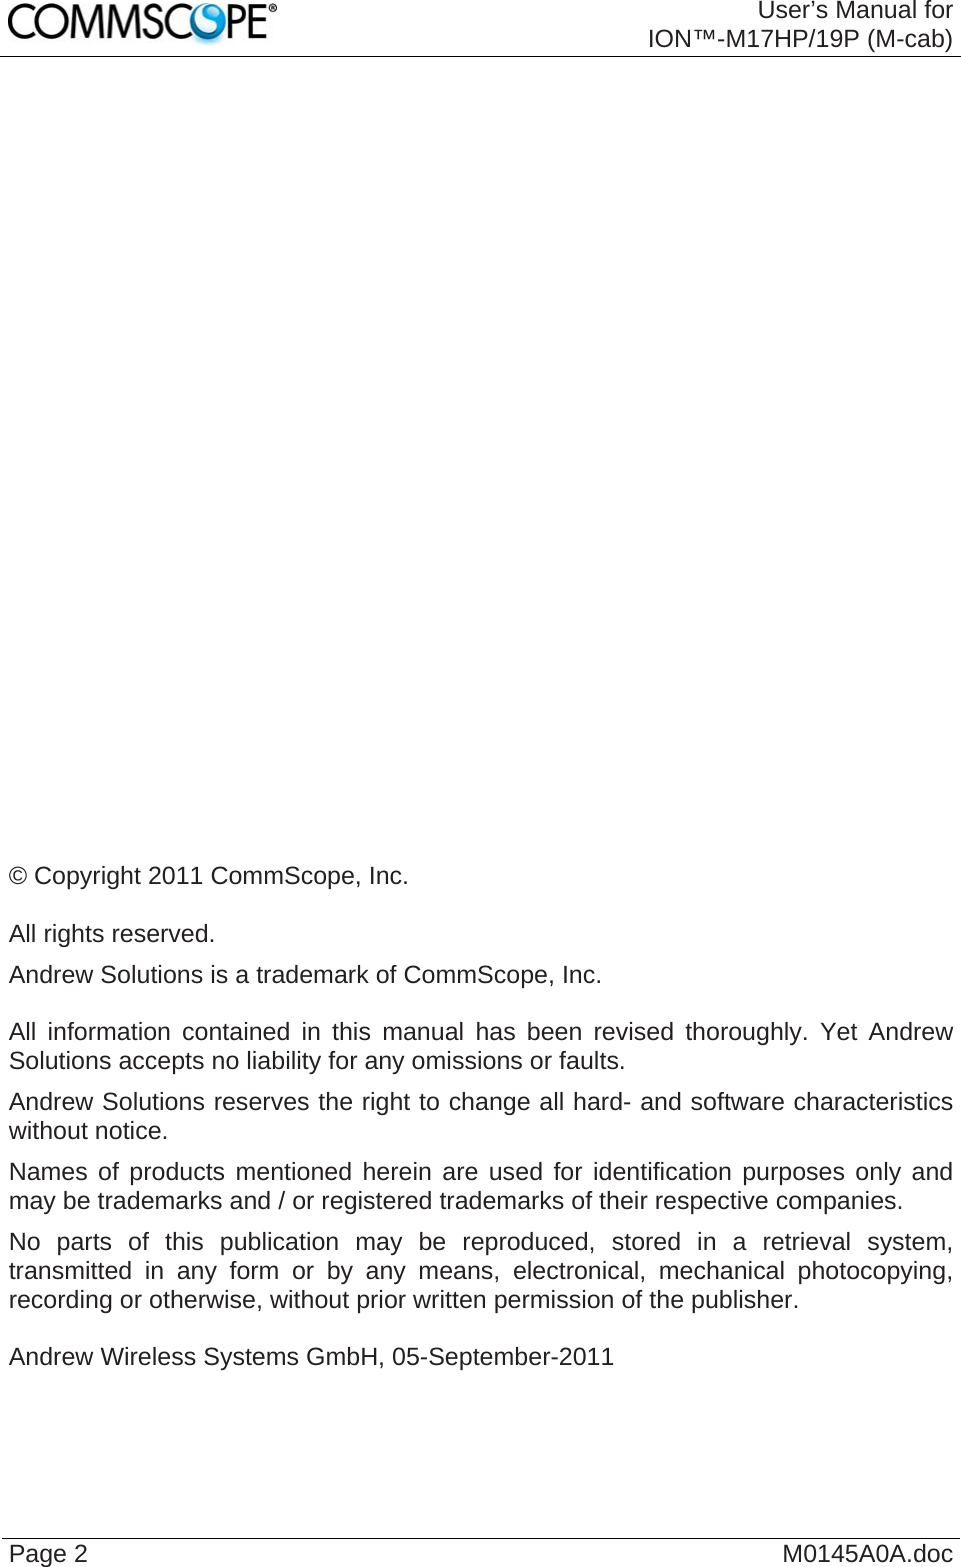  User’s Manual for ION™-M17HP/19P (M-cab) Page 2  M0145A0A.doc                            © Copyright 2011 CommScope, Inc.  All rights reserved. Andrew Solutions is a trademark of CommScope, Inc.  All information contained in this manual has been revised thoroughly. Yet Andrew Solutions accepts no liability for any omissions or faults. Andrew Solutions reserves the right to change all hard- and software characteristics without notice. Names of products mentioned herein are used for identification purposes only and may be trademarks and / or registered trademarks of their respective companies. No parts of this publication may be reproduced, stored in a retrieval system, transmitted in any form or by any means, electronical, mechanical photocopying, recording or otherwise, without prior written permission of the publisher.  Andrew Wireless Systems GmbH, 05-September-2011  